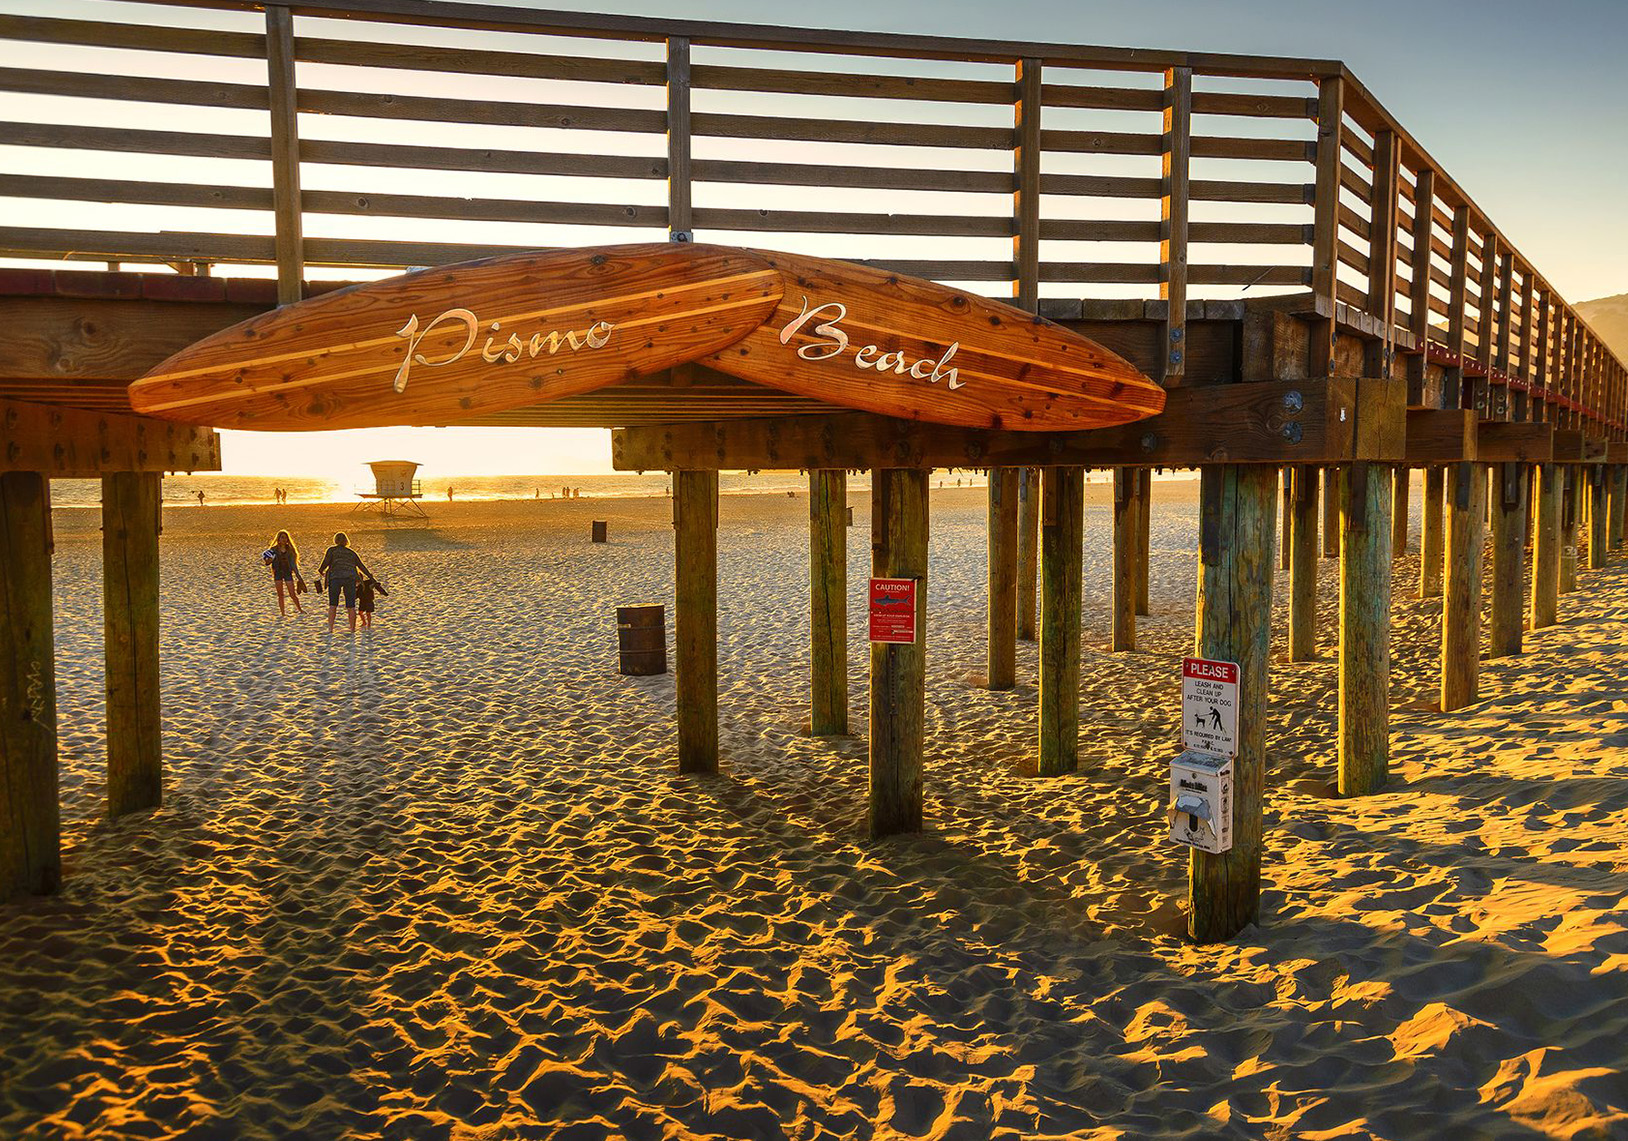 Things To Do In Pismo Beach